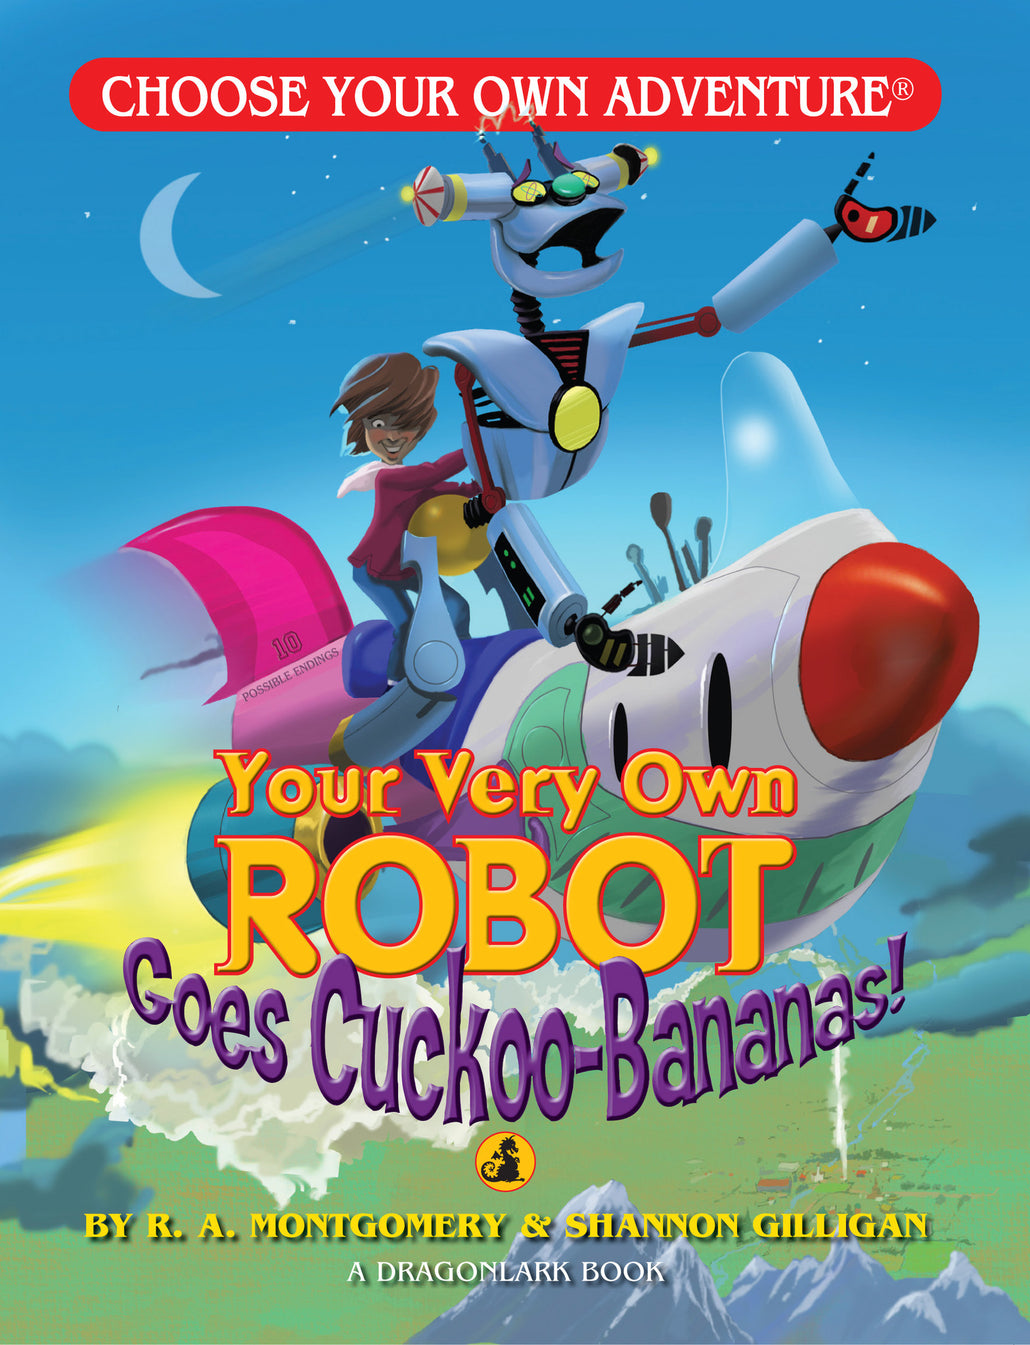 Your Very Own Robot Goes Cuckoo-Bananas!